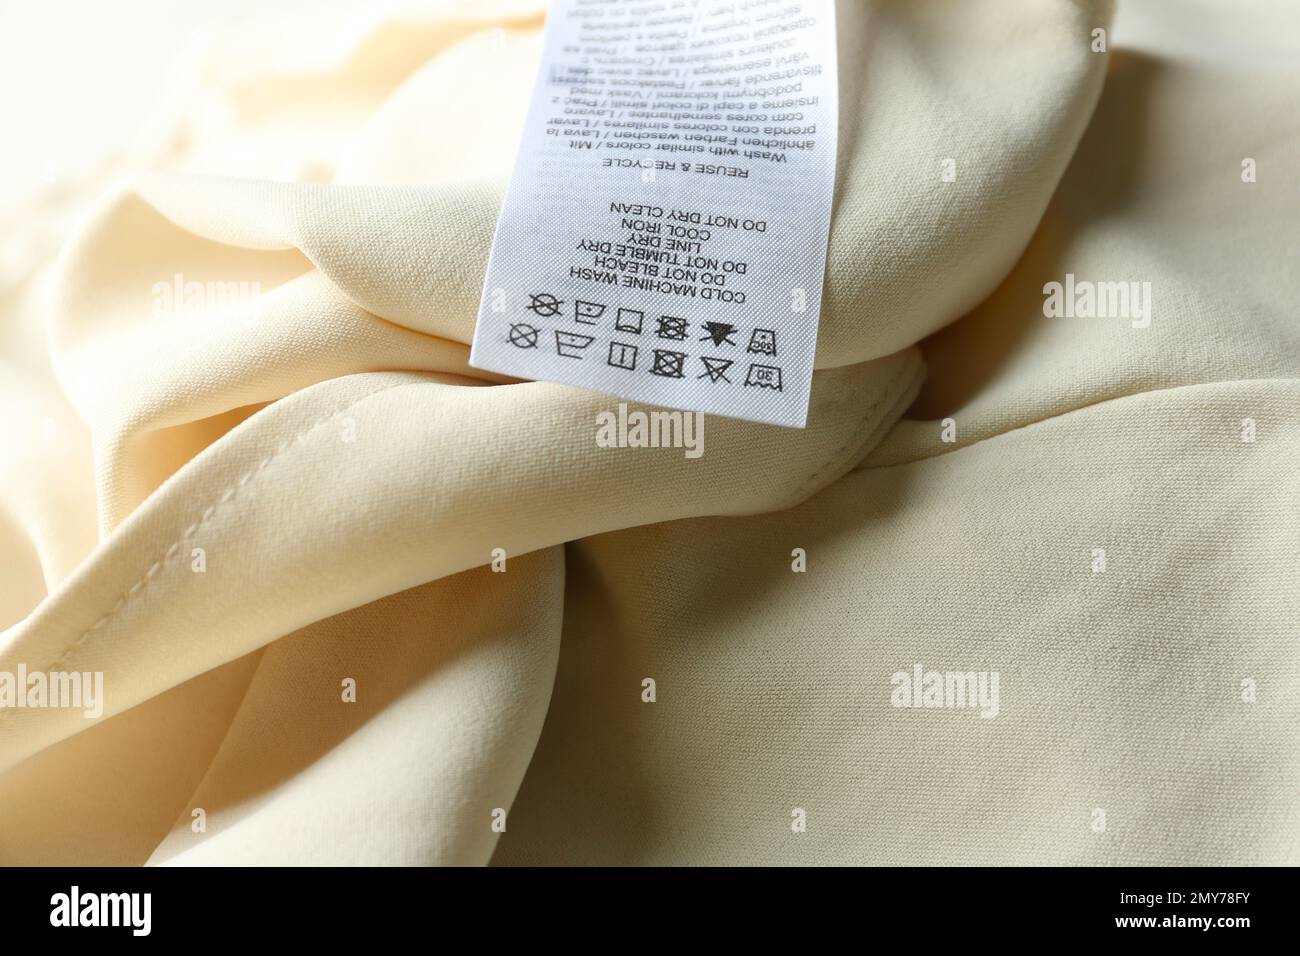 Clothing label with care instructions on beige garment, closeup Stock Photo